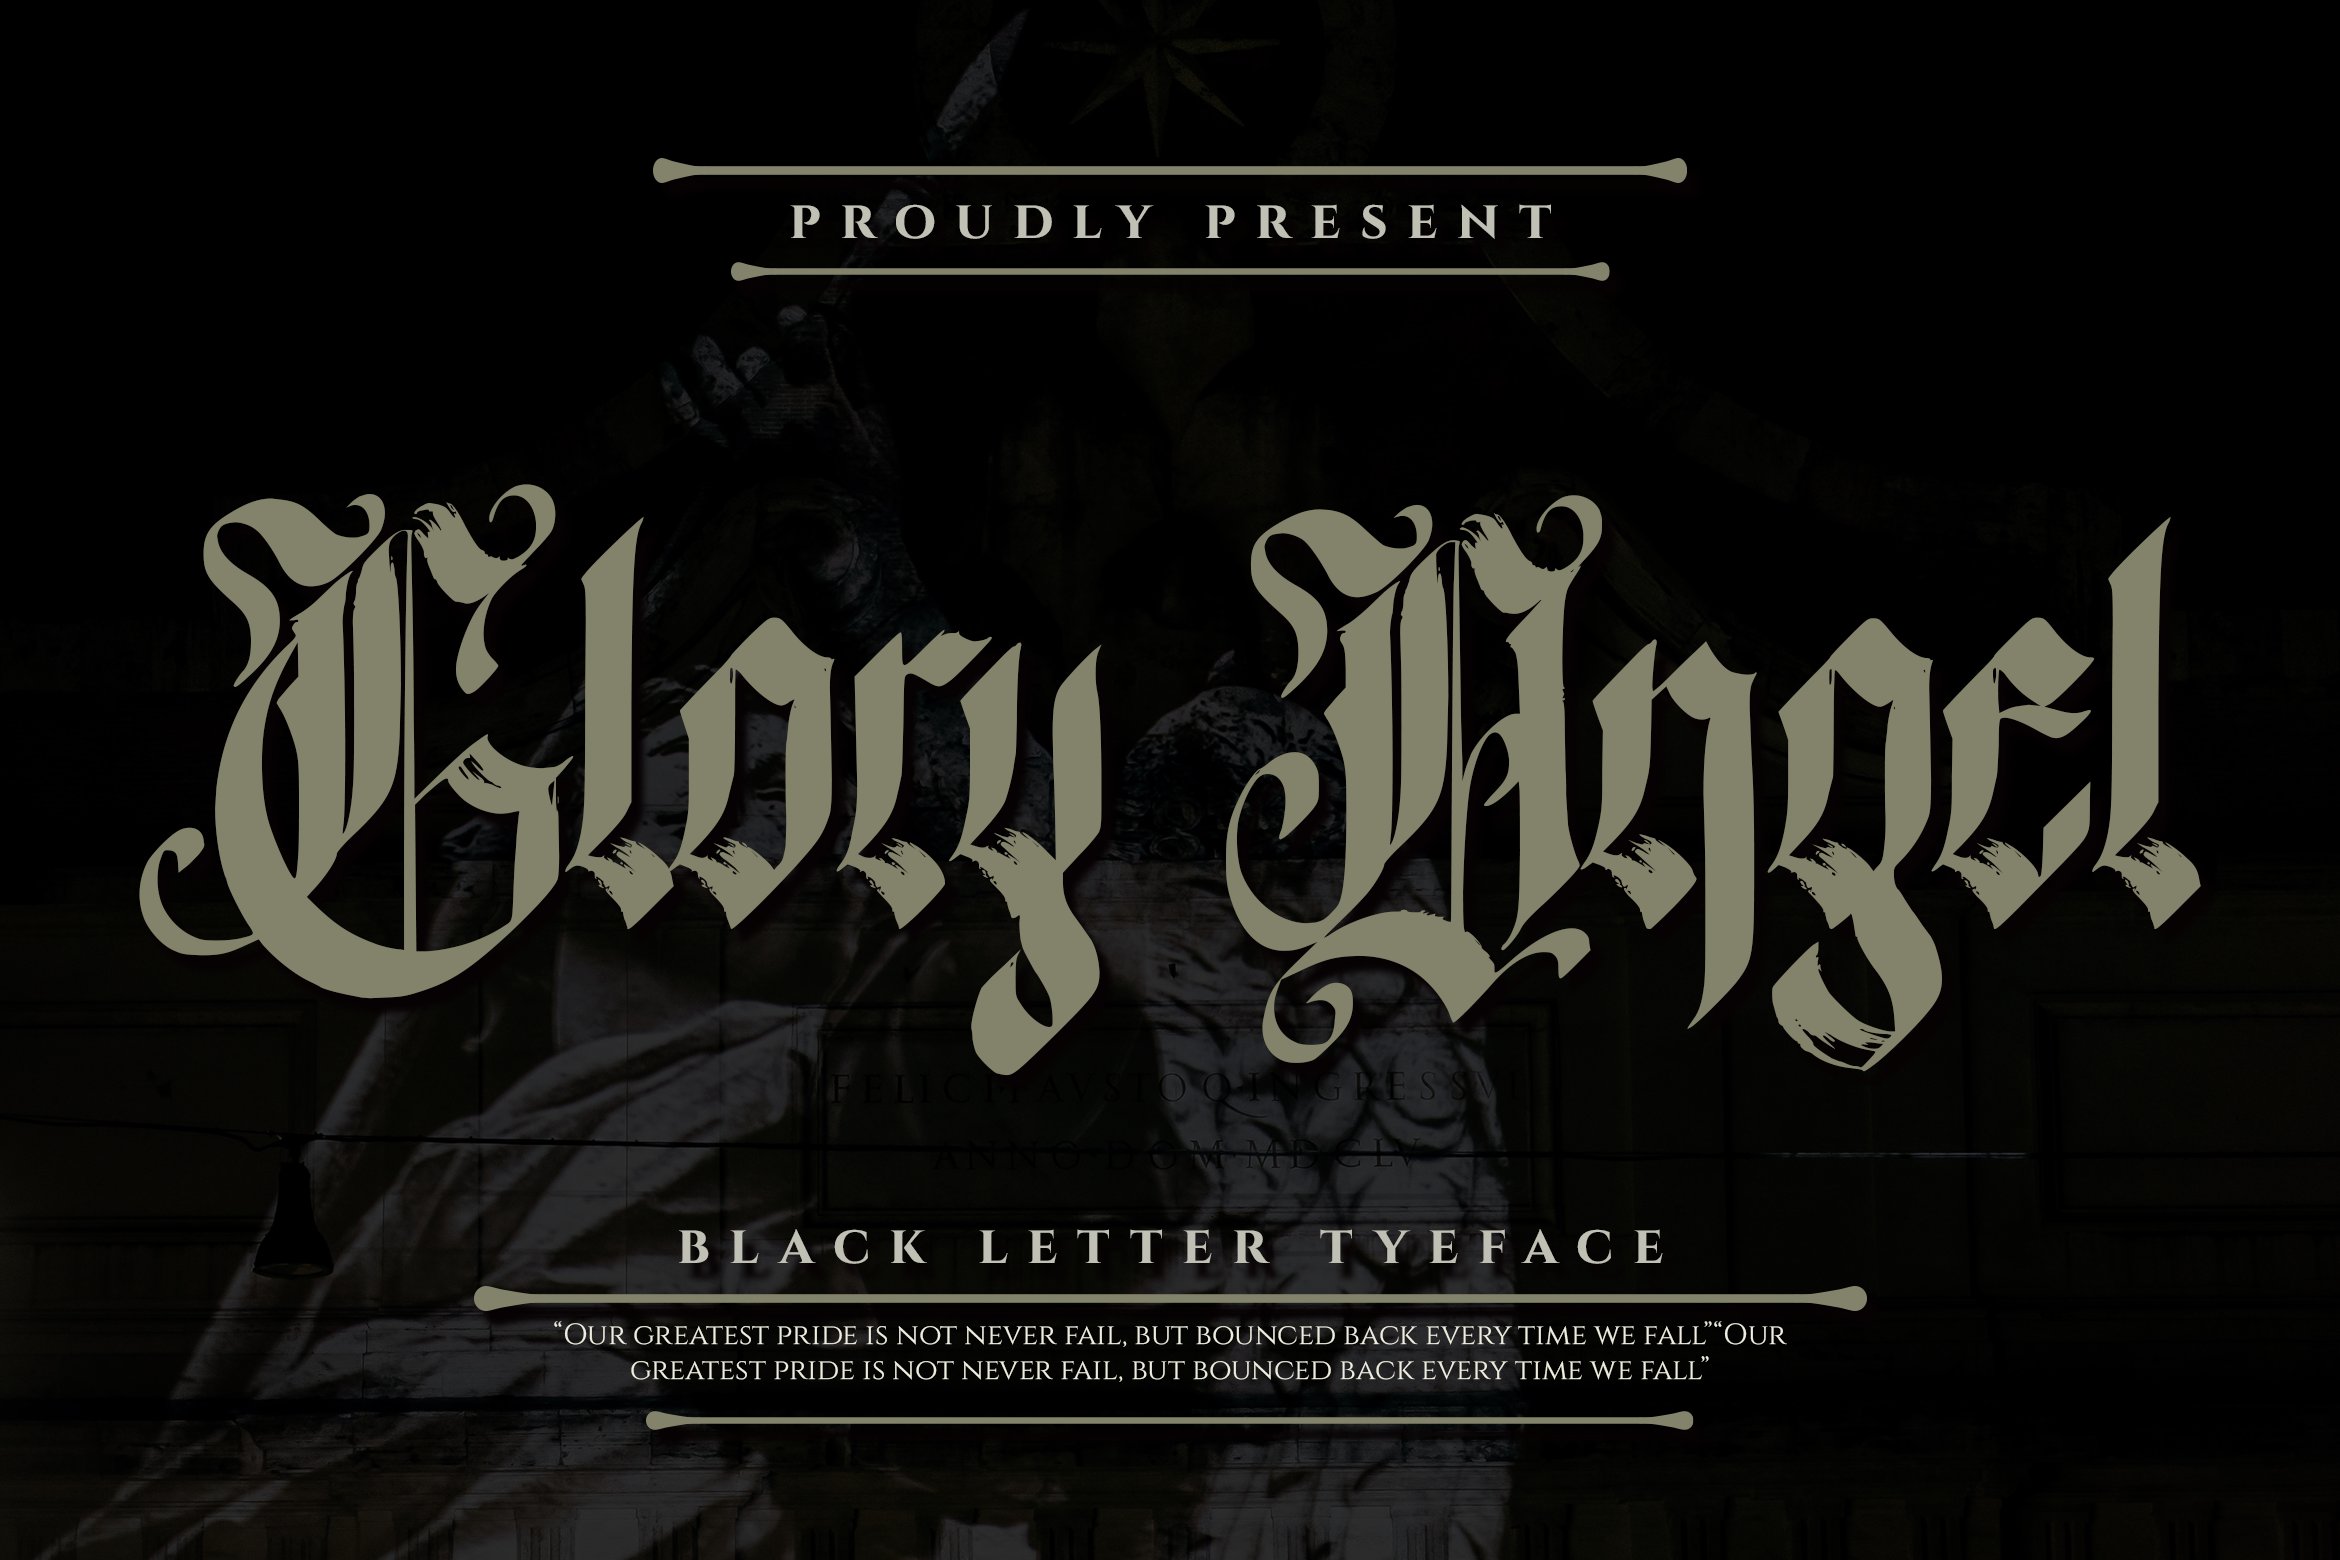 Glory Angel - Blackletter Typeface cover image.